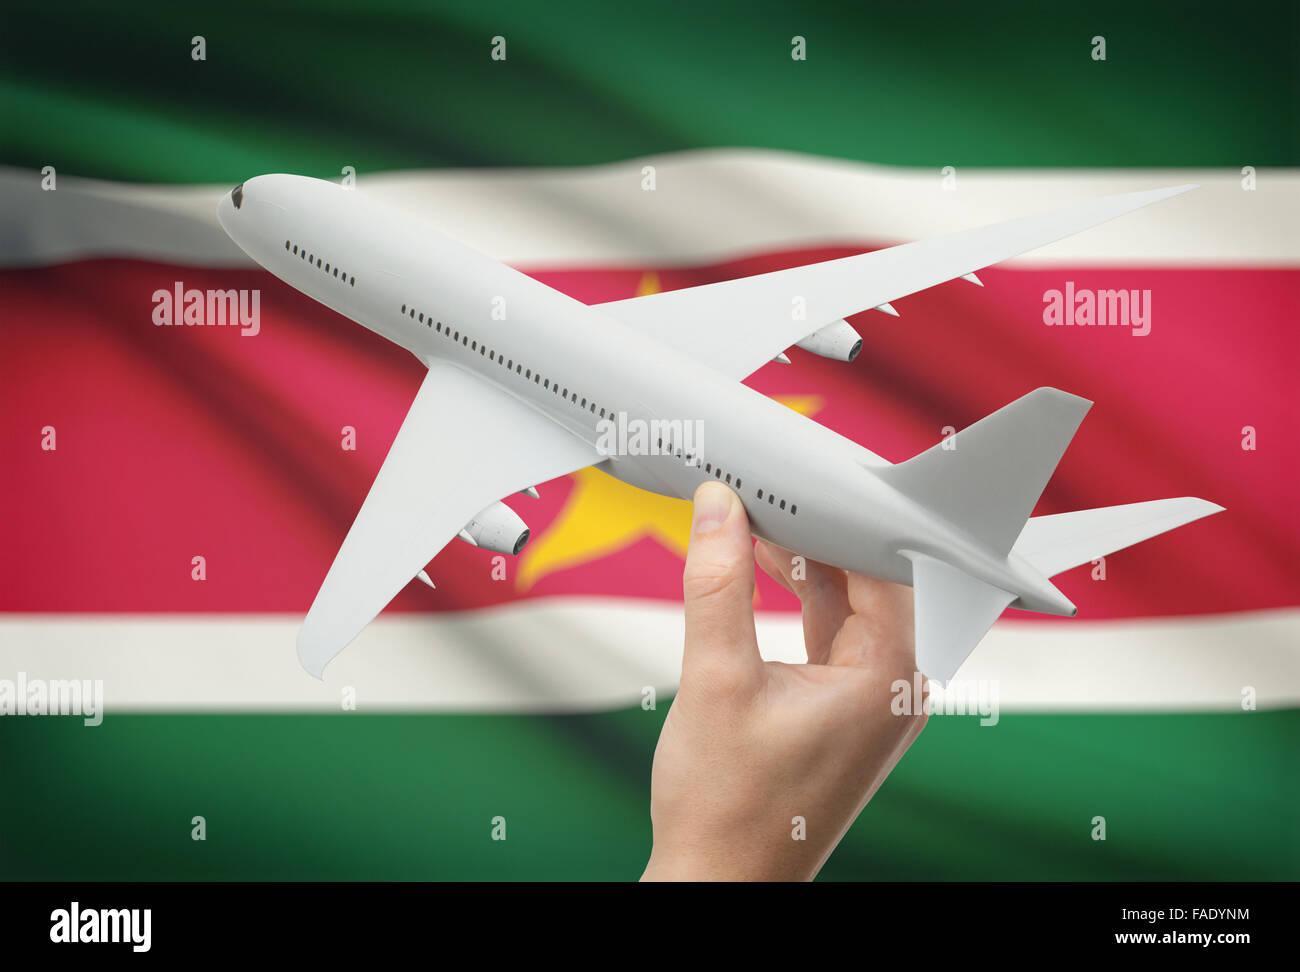 Airplane in hand with national flag on background - Suriname Stock Photo